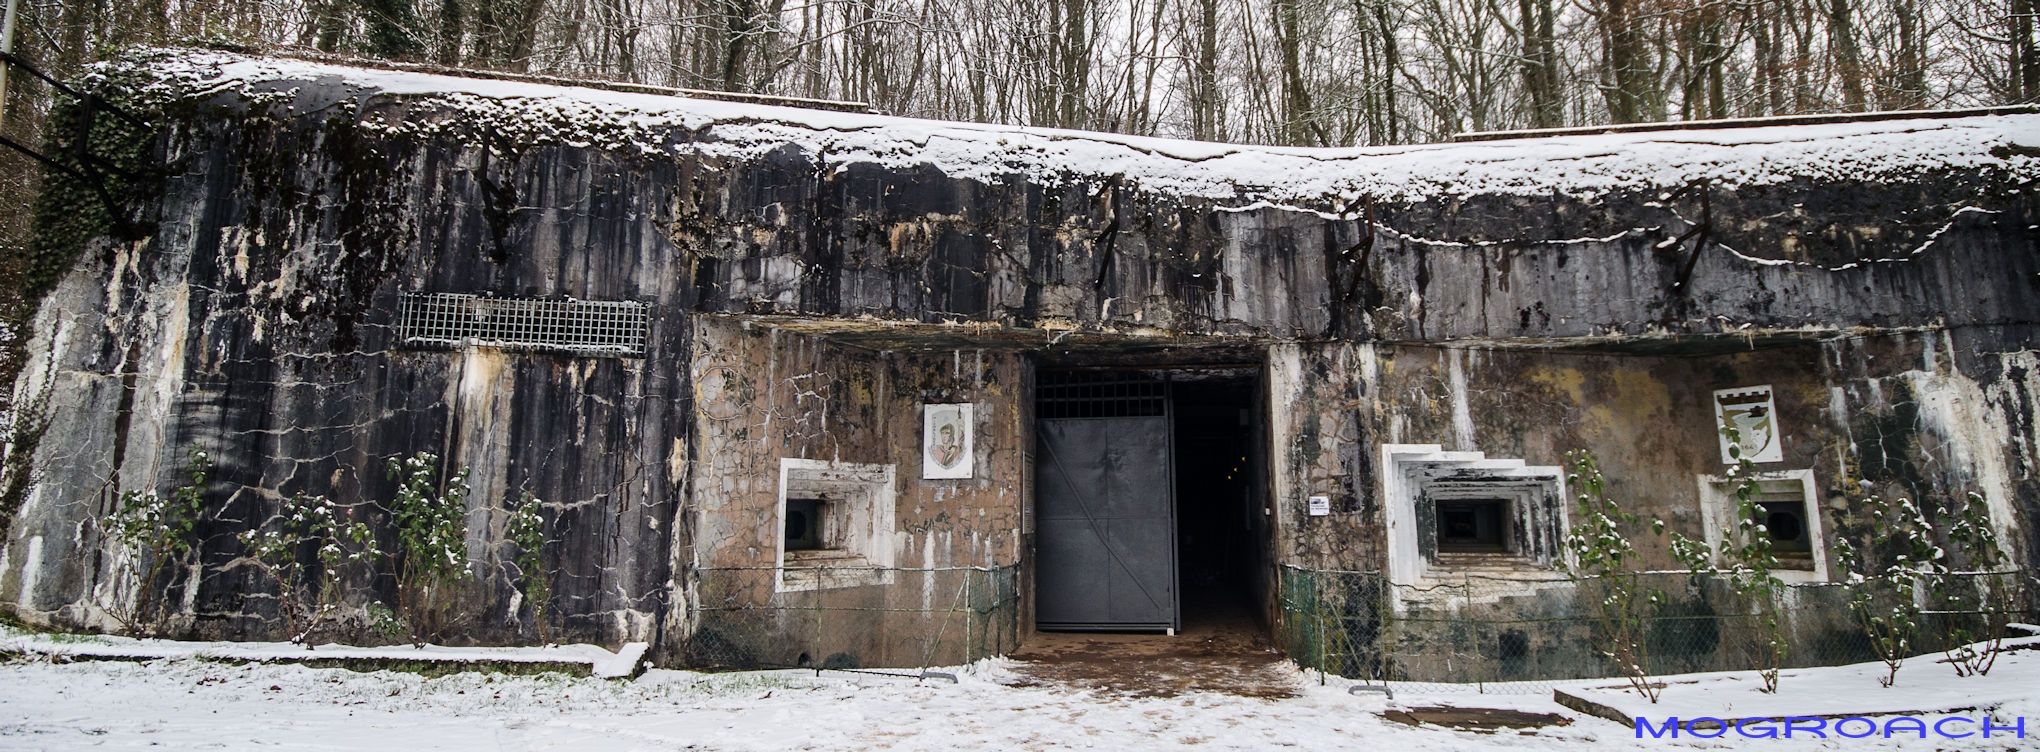 Gros Ouvrage Michelsberg Maginot